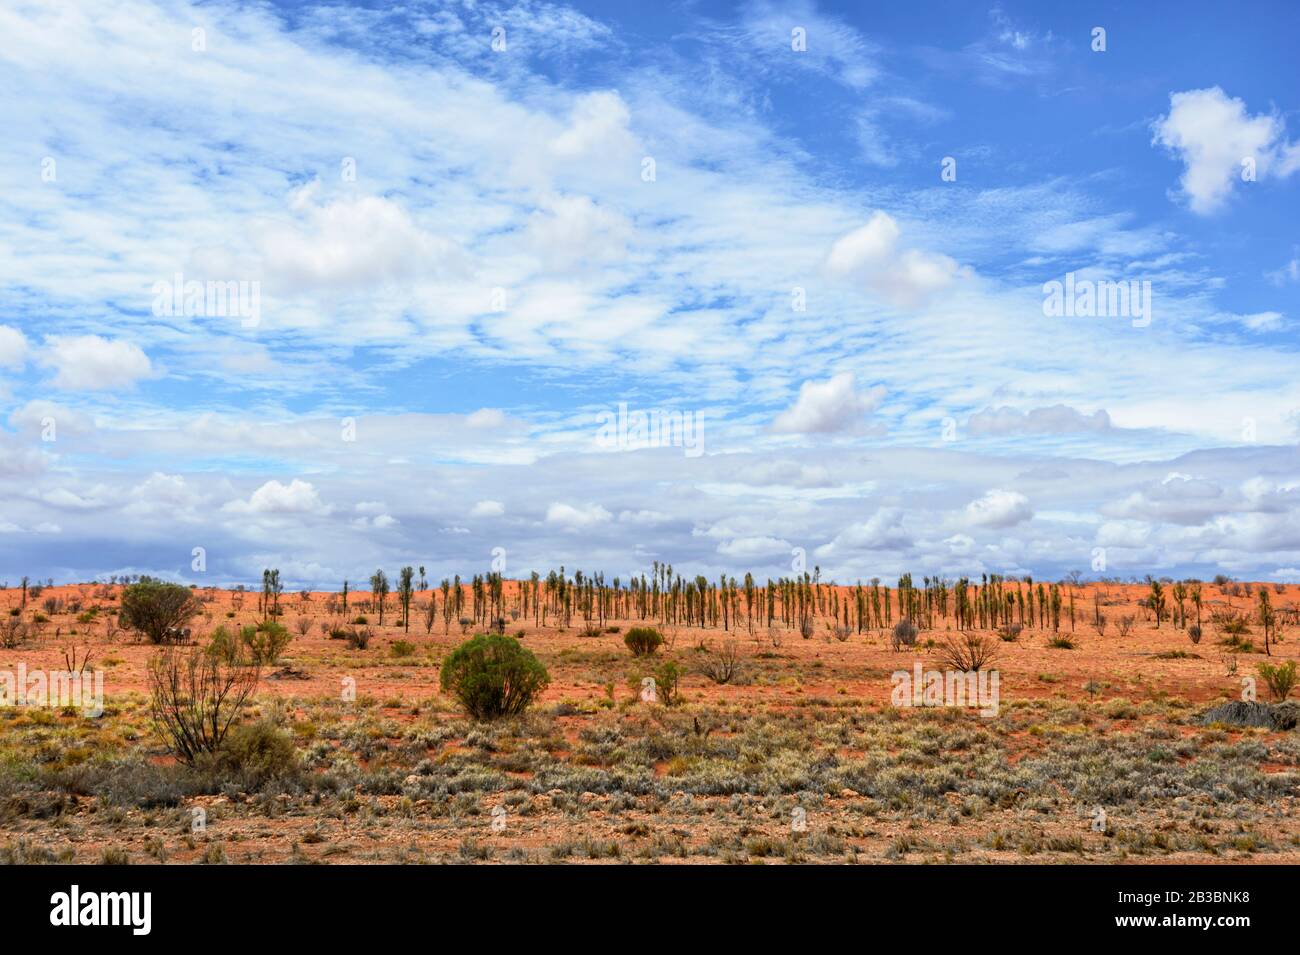 She-oak trees growing in red sand dunes along the Stuart Highway, Northern Territory, NT, Australia Stock Photo